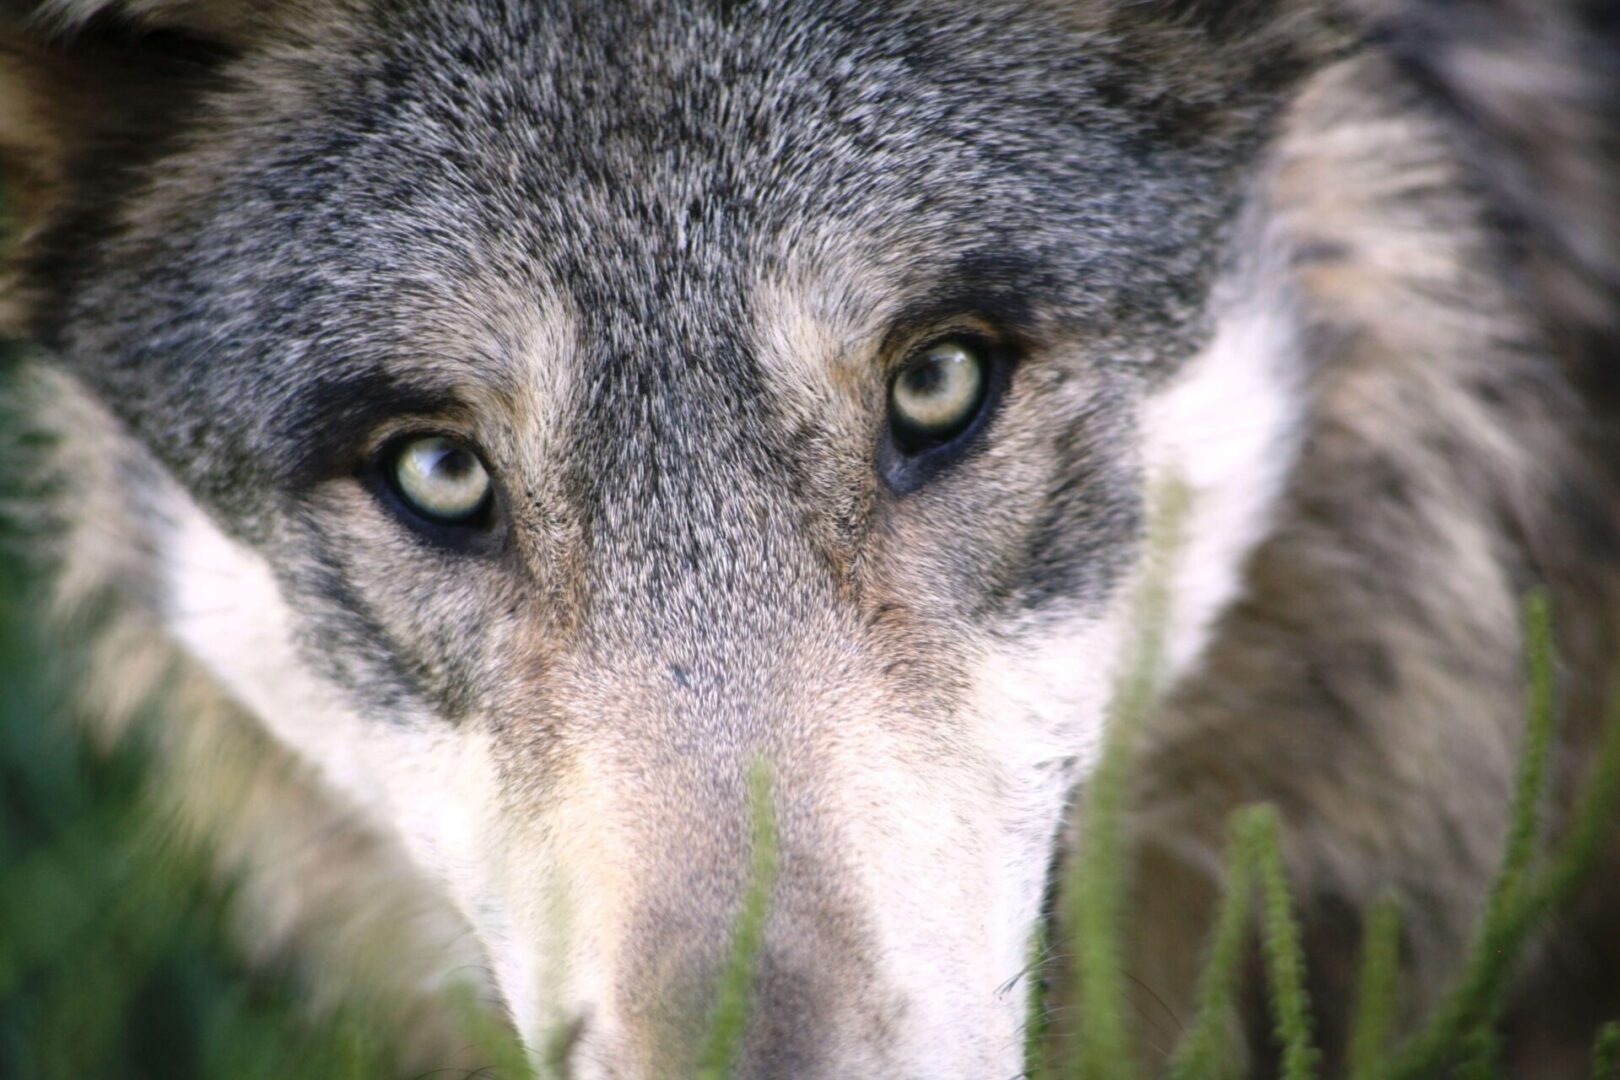 A close up of the eyes and nose of a wolf.